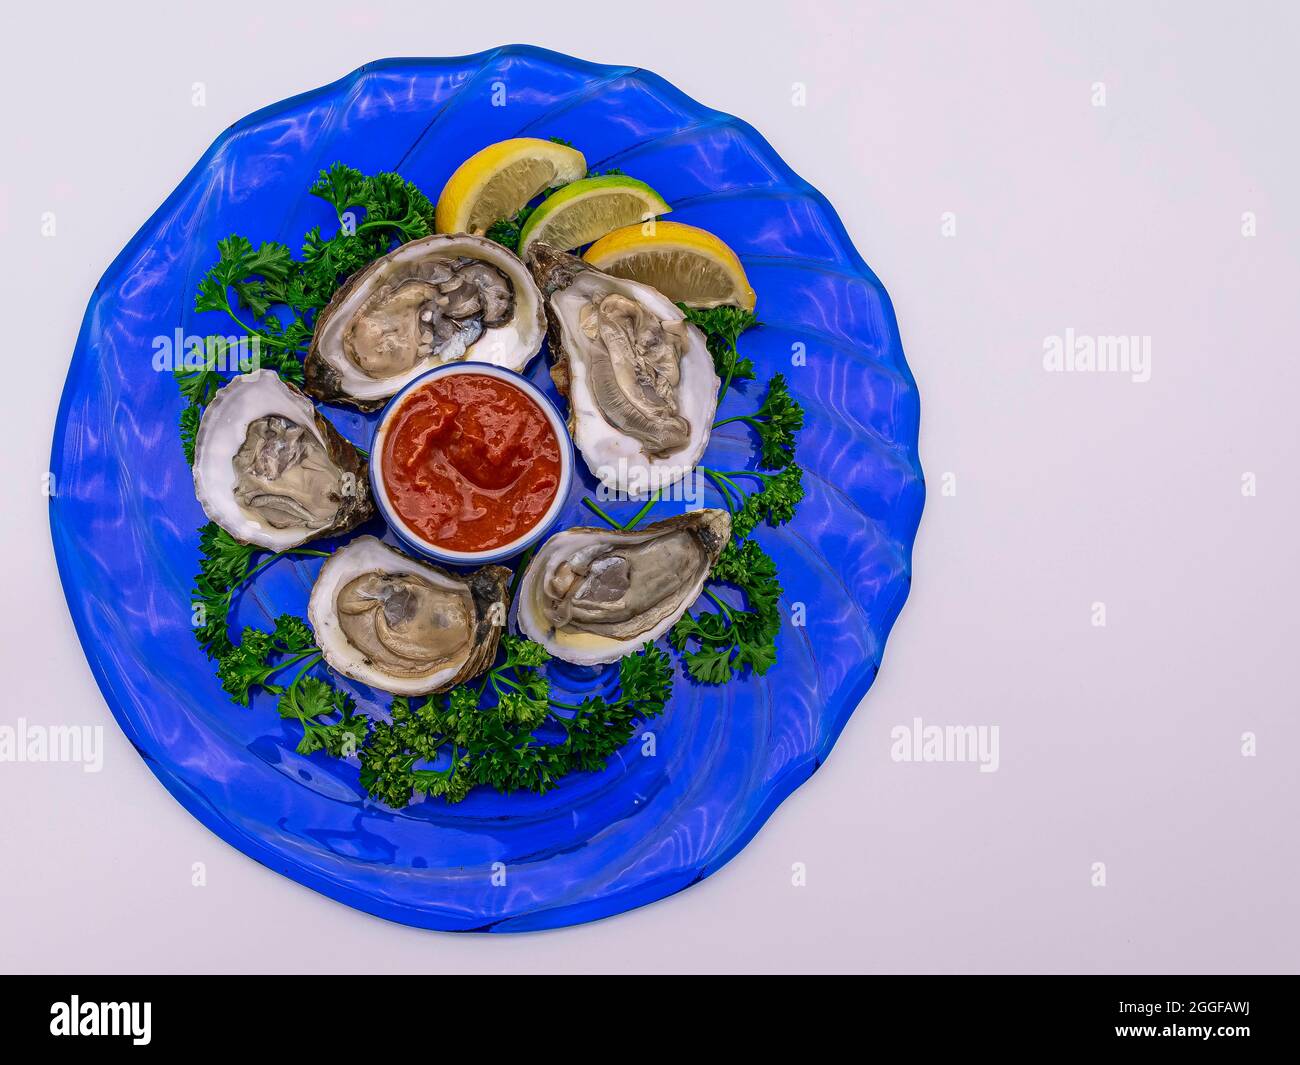 Oyster appetizer served on a round blue plate with colorful garnish  offset on a white background. Stock Photo